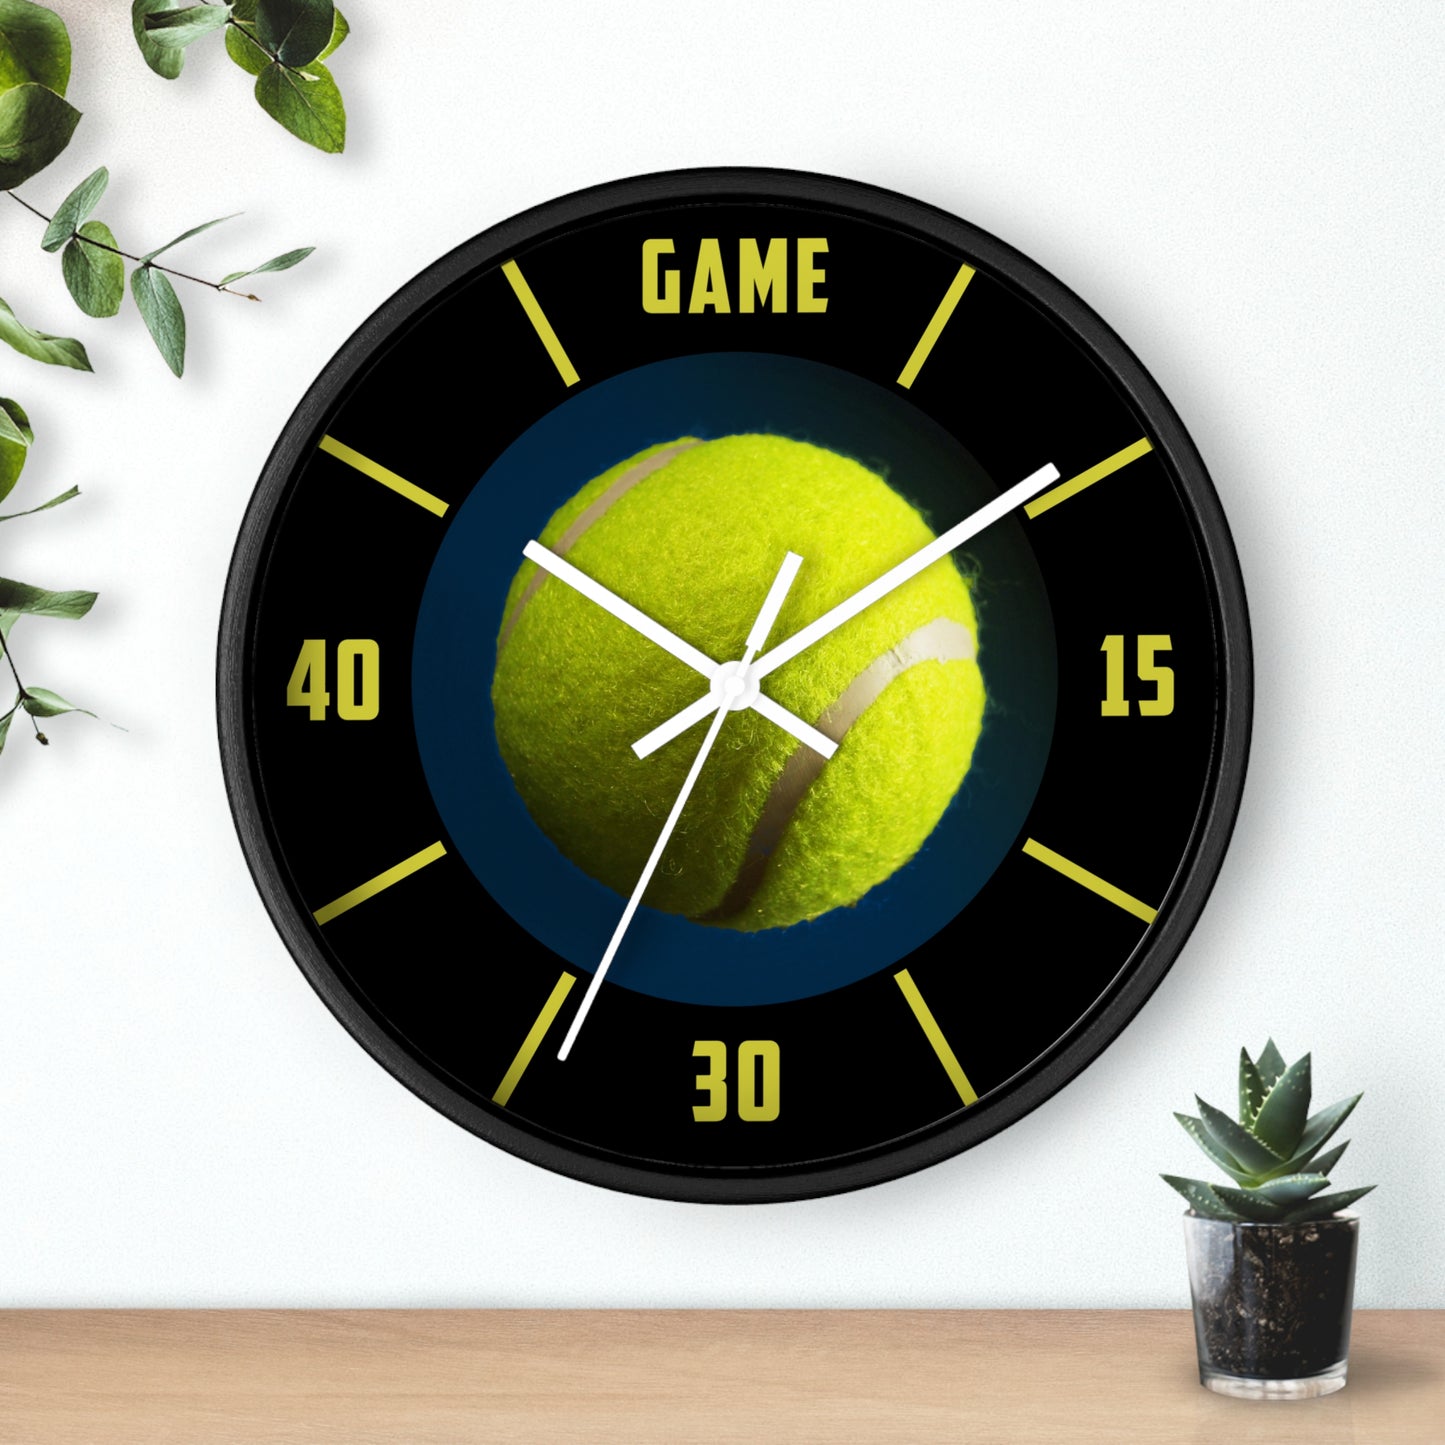 TENNIS CLOCK - 10" Wall Clock, with Tennis Ball, funny gift for Tennis Player, Tennis Club Decor, 2" black frame and plexiglass front